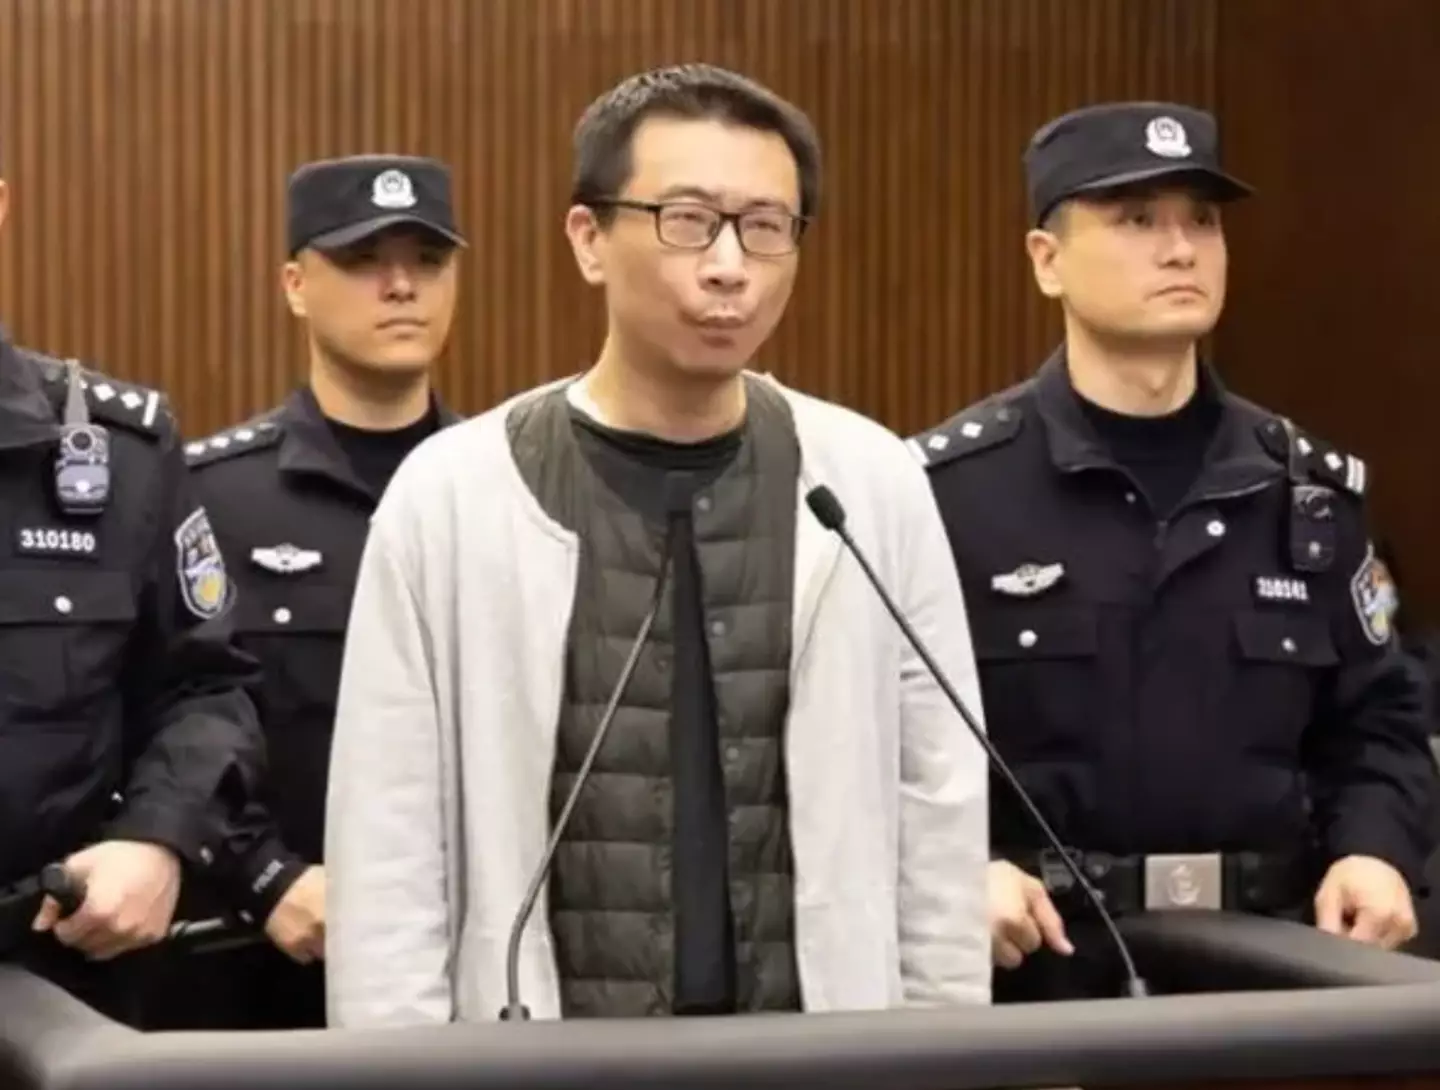 Xu was sentenced to death for his crime.